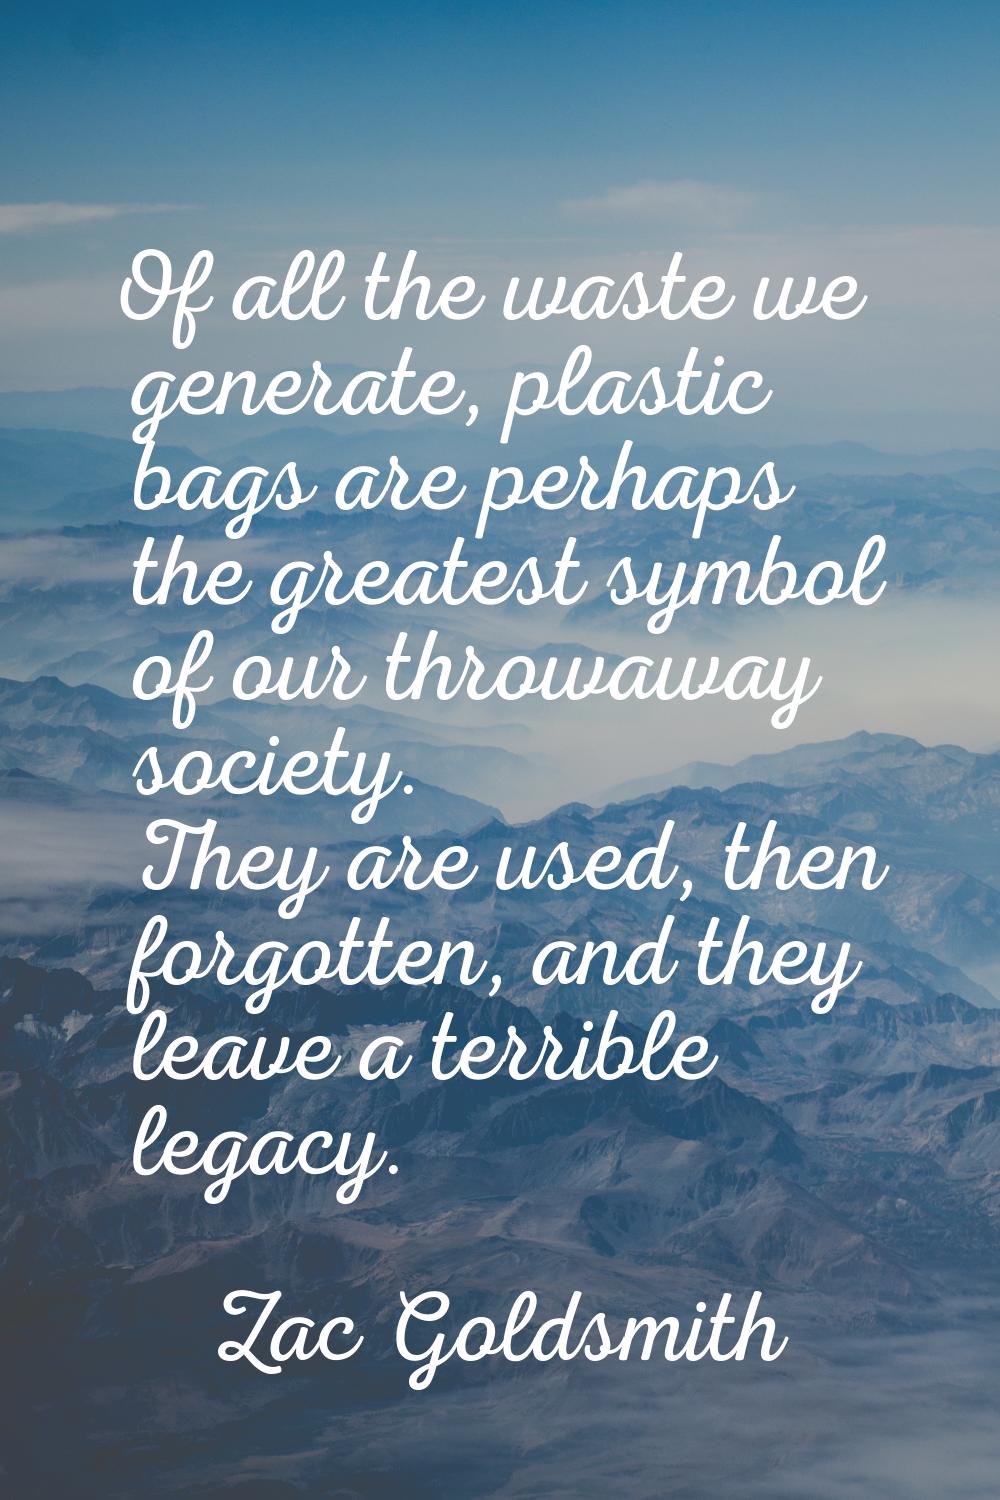 Of all the waste we generate, plastic bags are perhaps the greatest symbol of our throwaway society